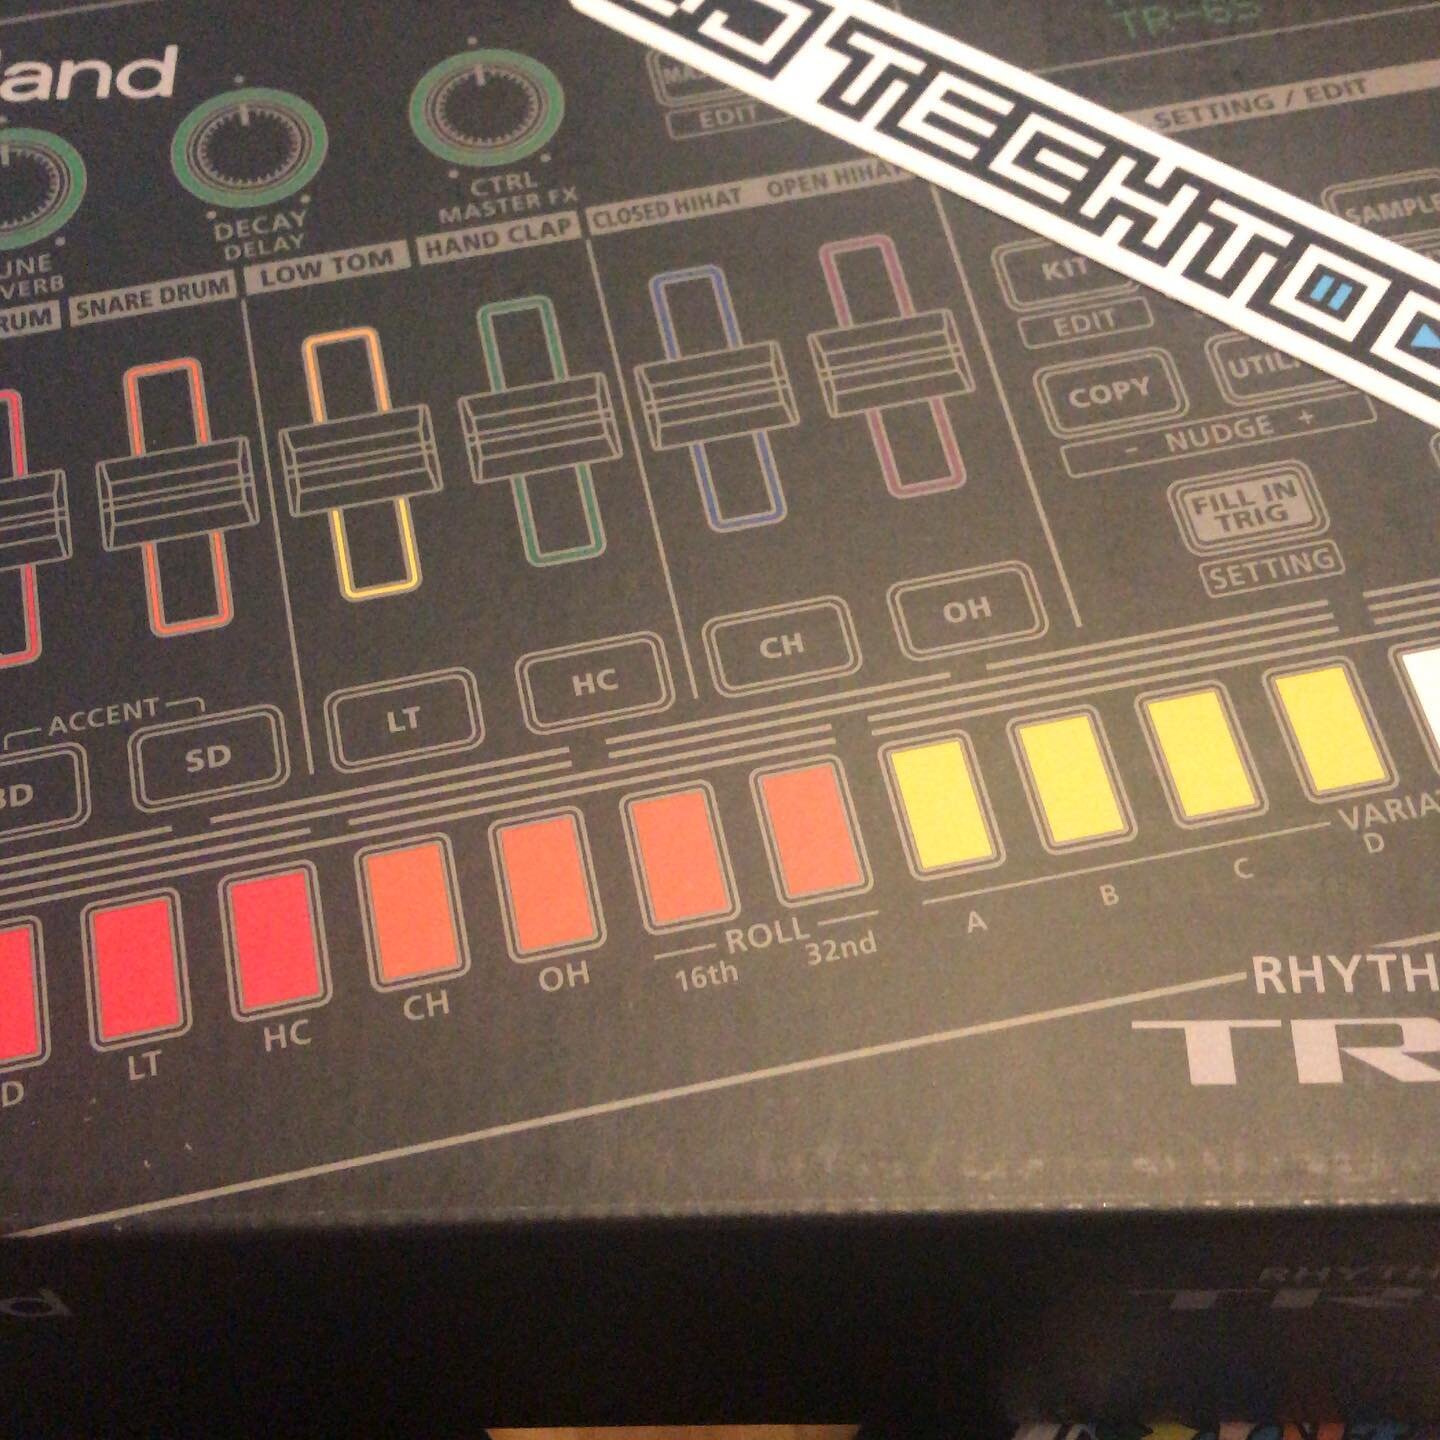 Just a few days too late for #jamuary but gonna have fun with this regardless!  Thanks @djtechtools #roland #tr6s